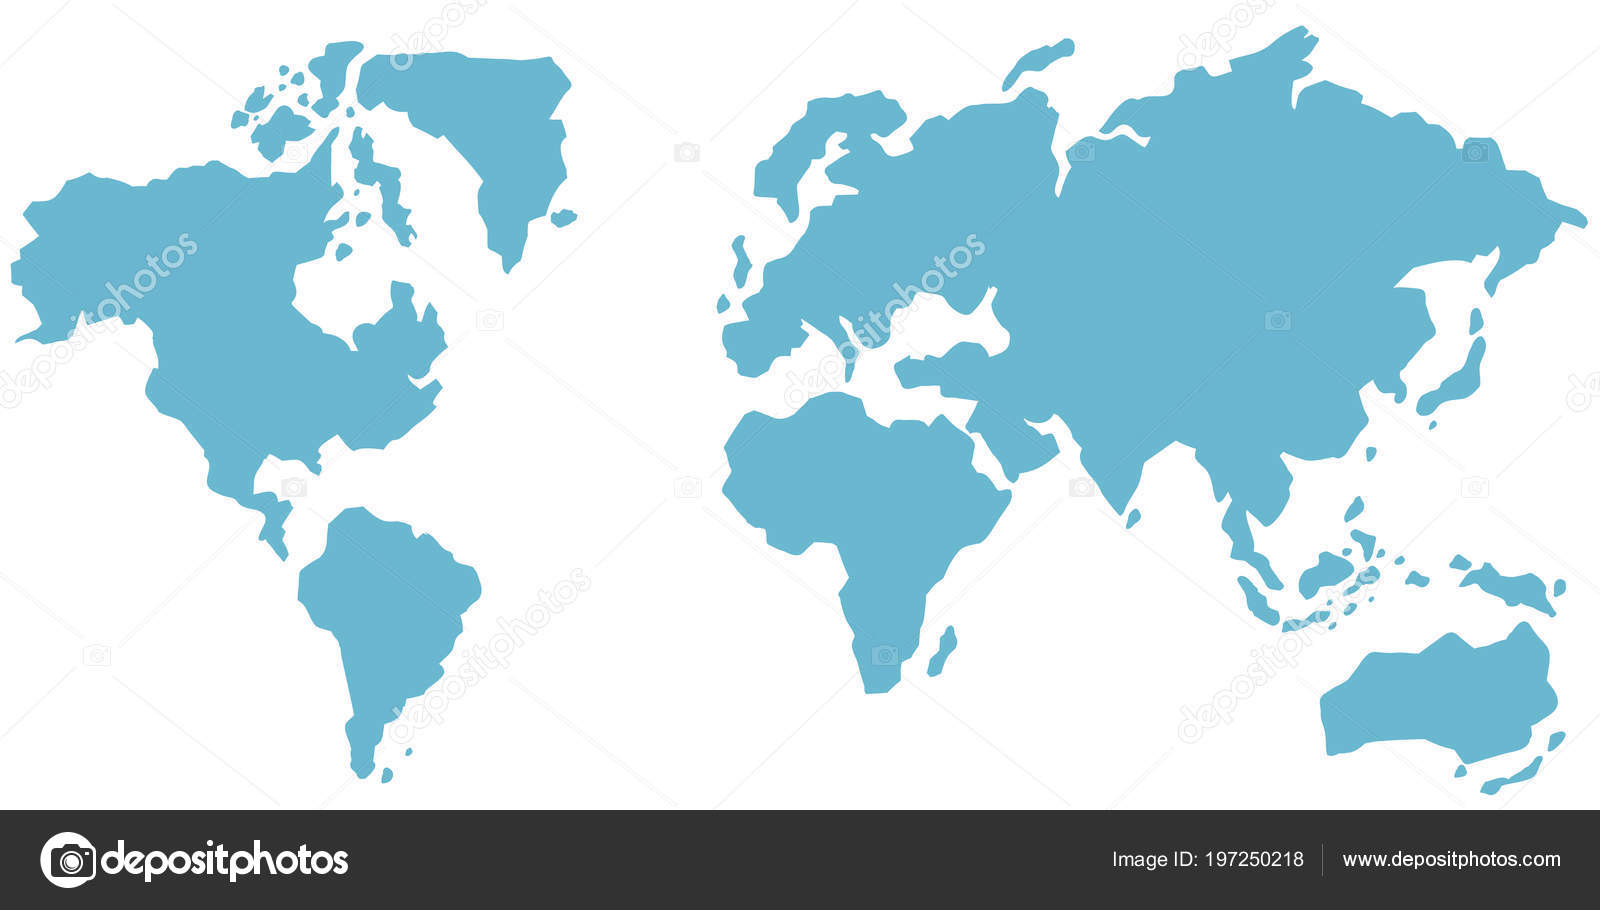 Blue World Map White Background Illustration Vector Image By C Brgfx Vector Stock